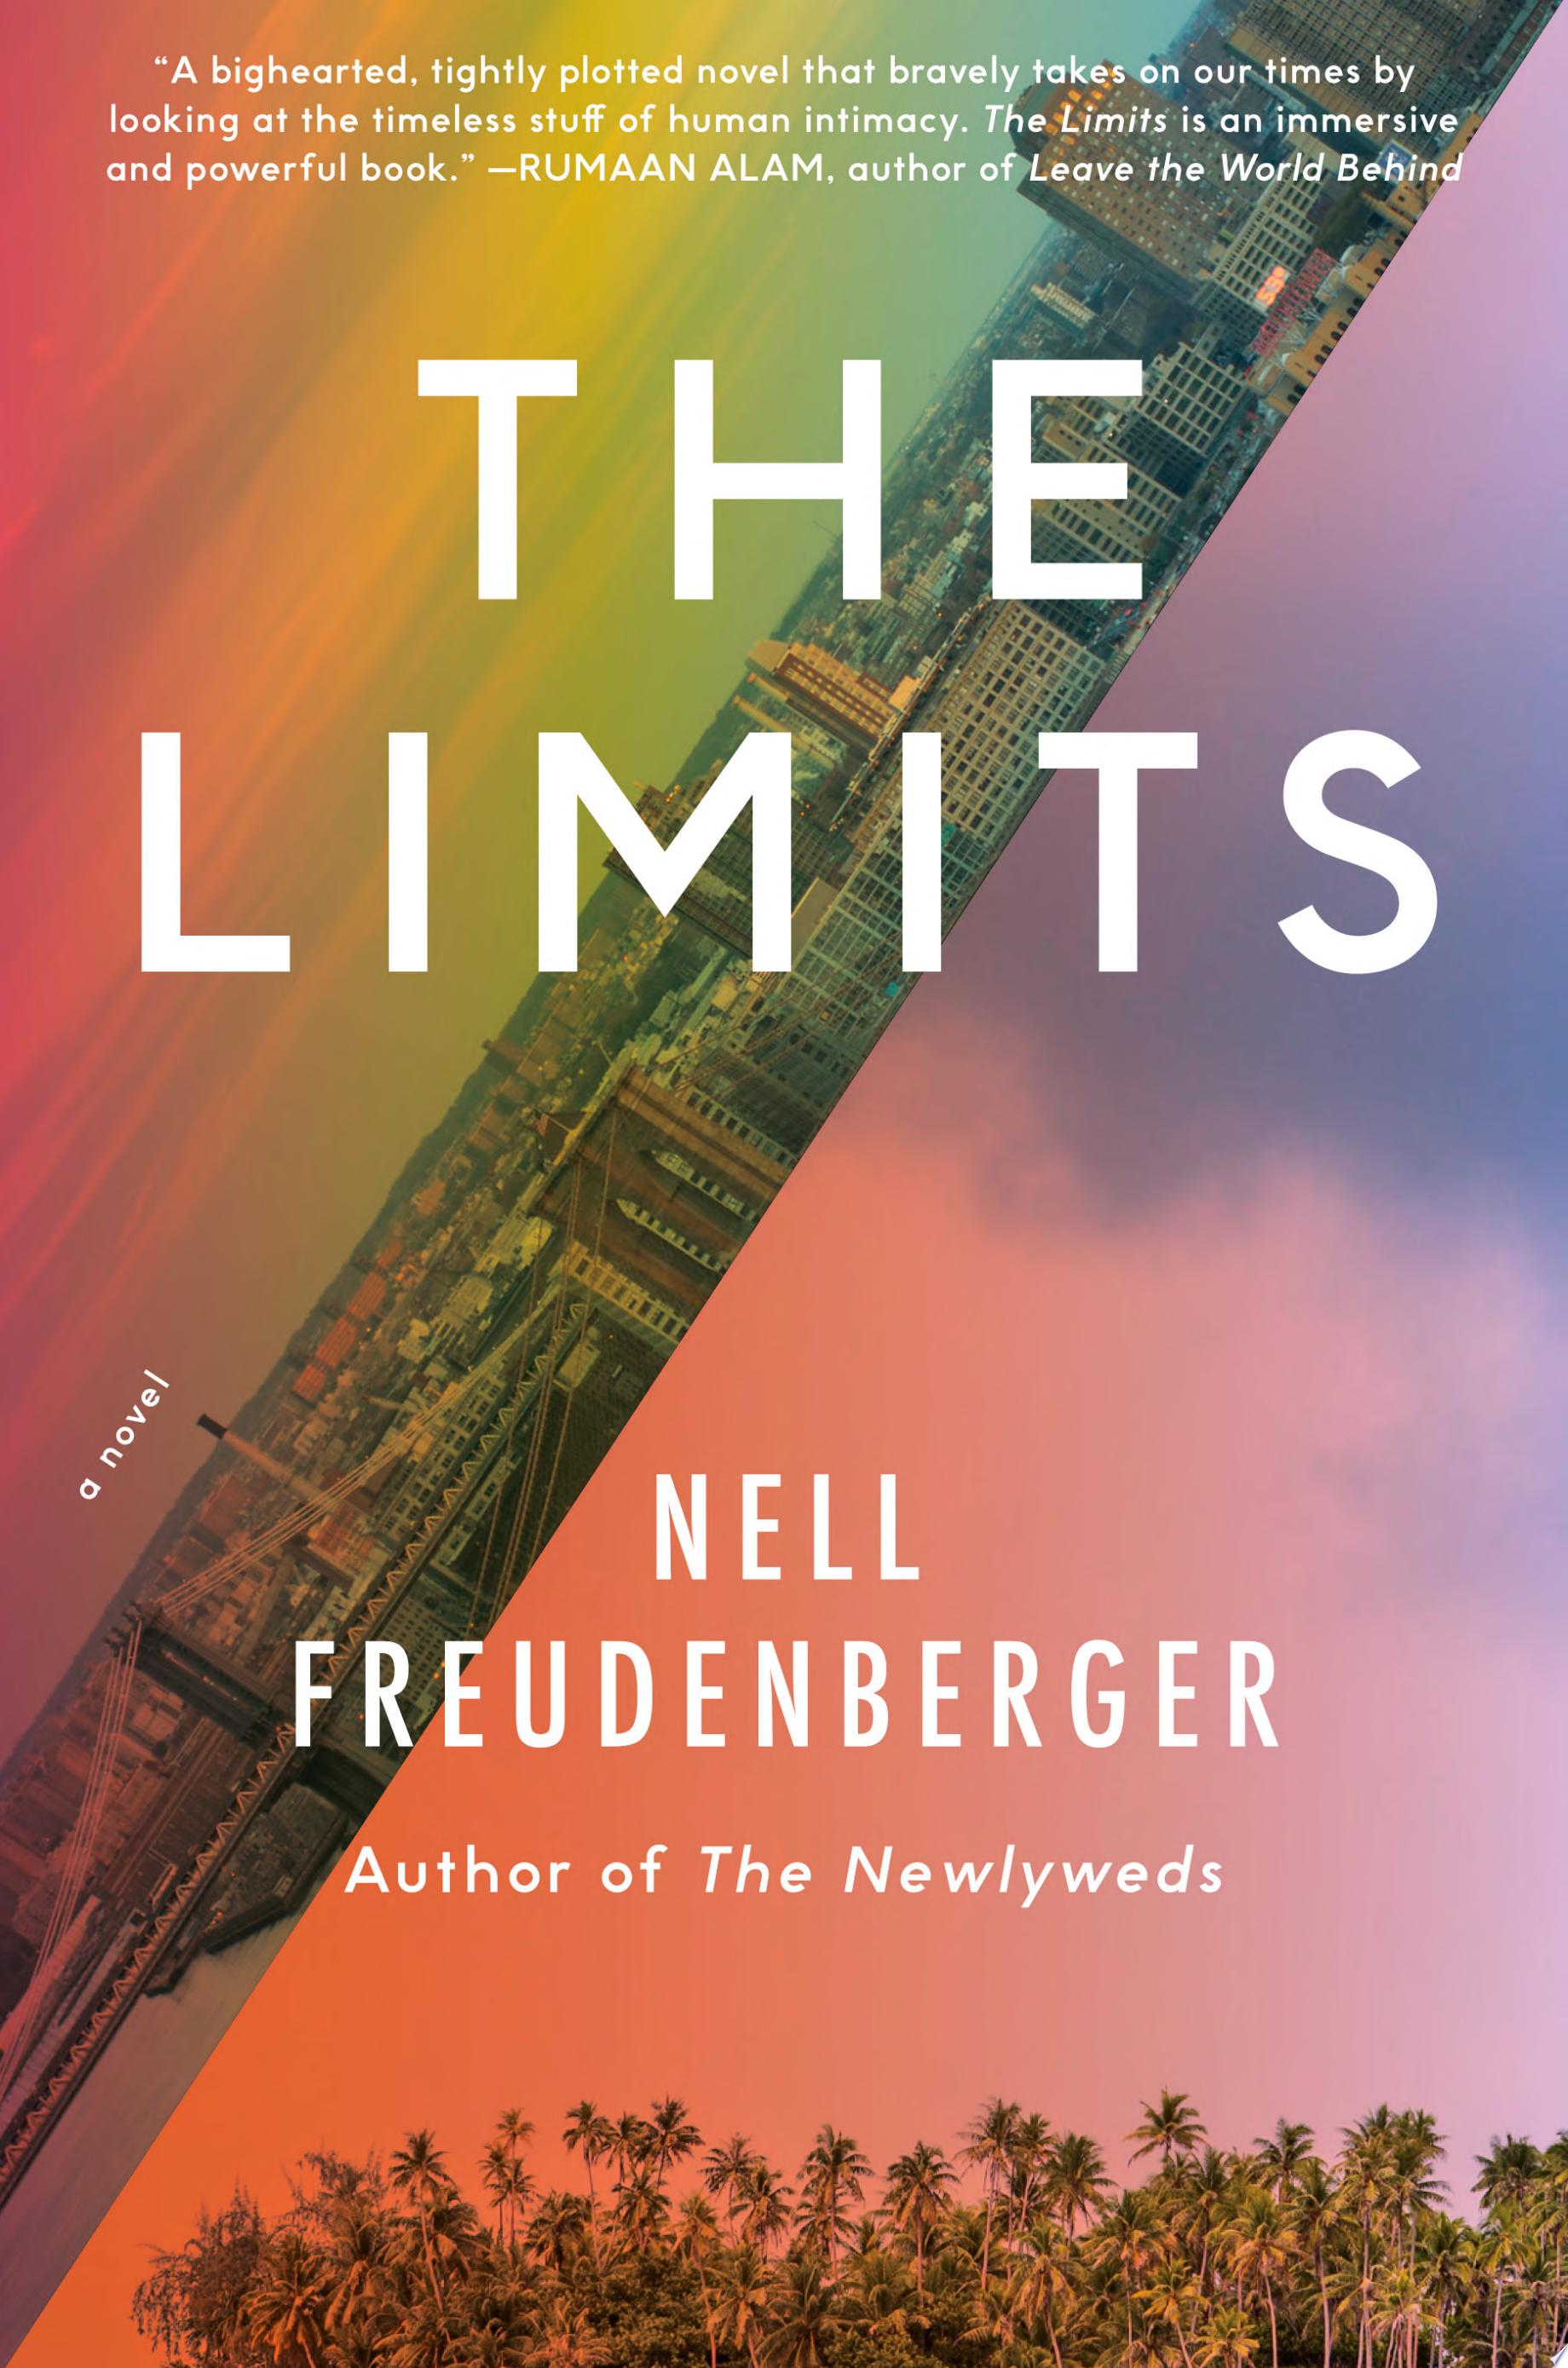 Image for "The Limits"